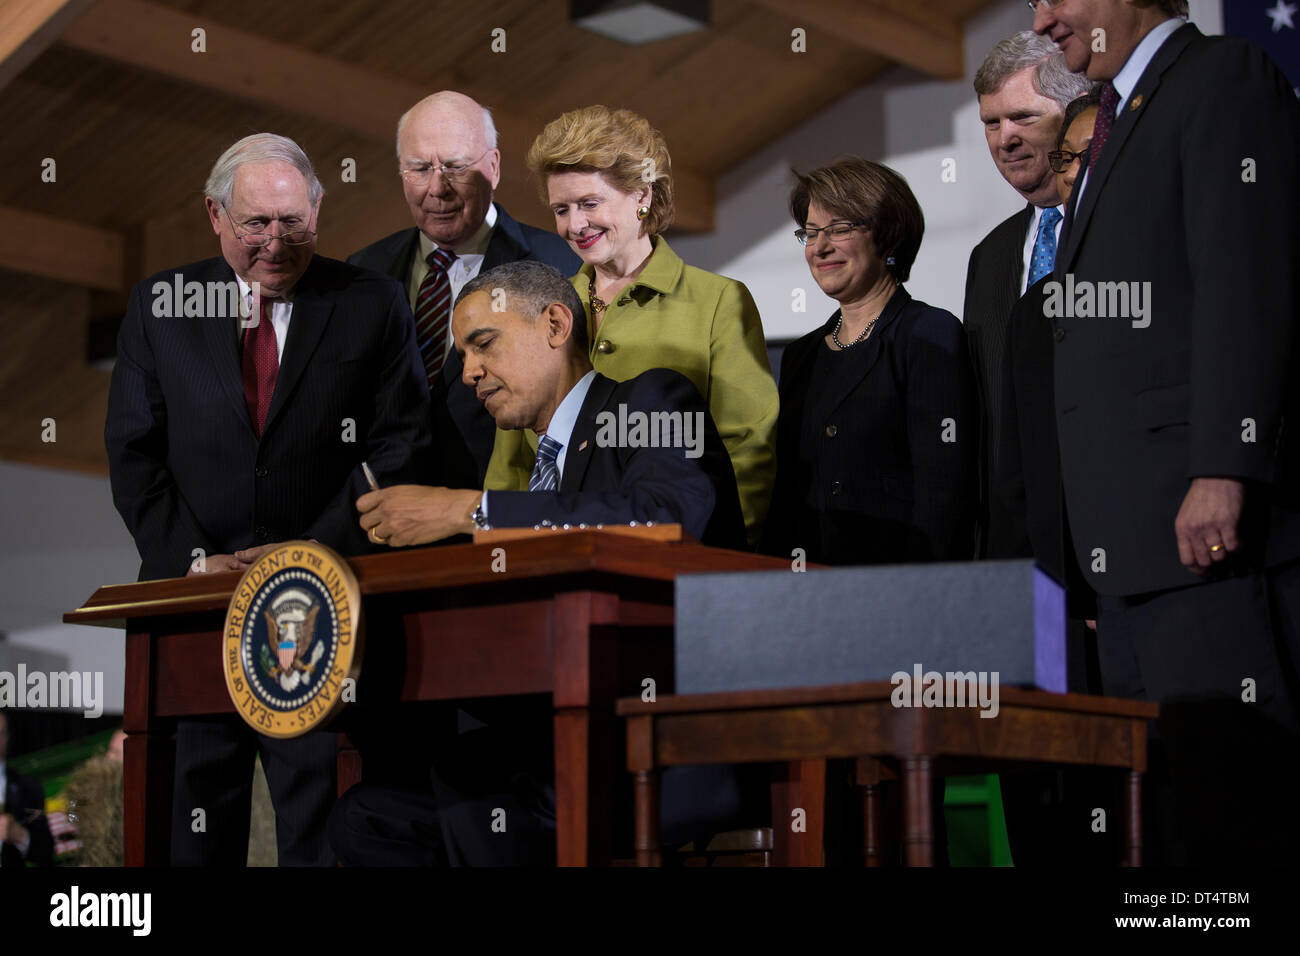 US President Barack Obama signs the Agricultural Act of 2014 known as the Farm Bill during a ceremony at Michigan State University February 7, 2014 in East Lansingg, MI. Standing with the president are (L-R) Senators Carl Levin, Patrick Leahy, Debbie Stabenow, Amy Klobuchar and Agriculture Secretary Tom Vilsack. Stock Photo